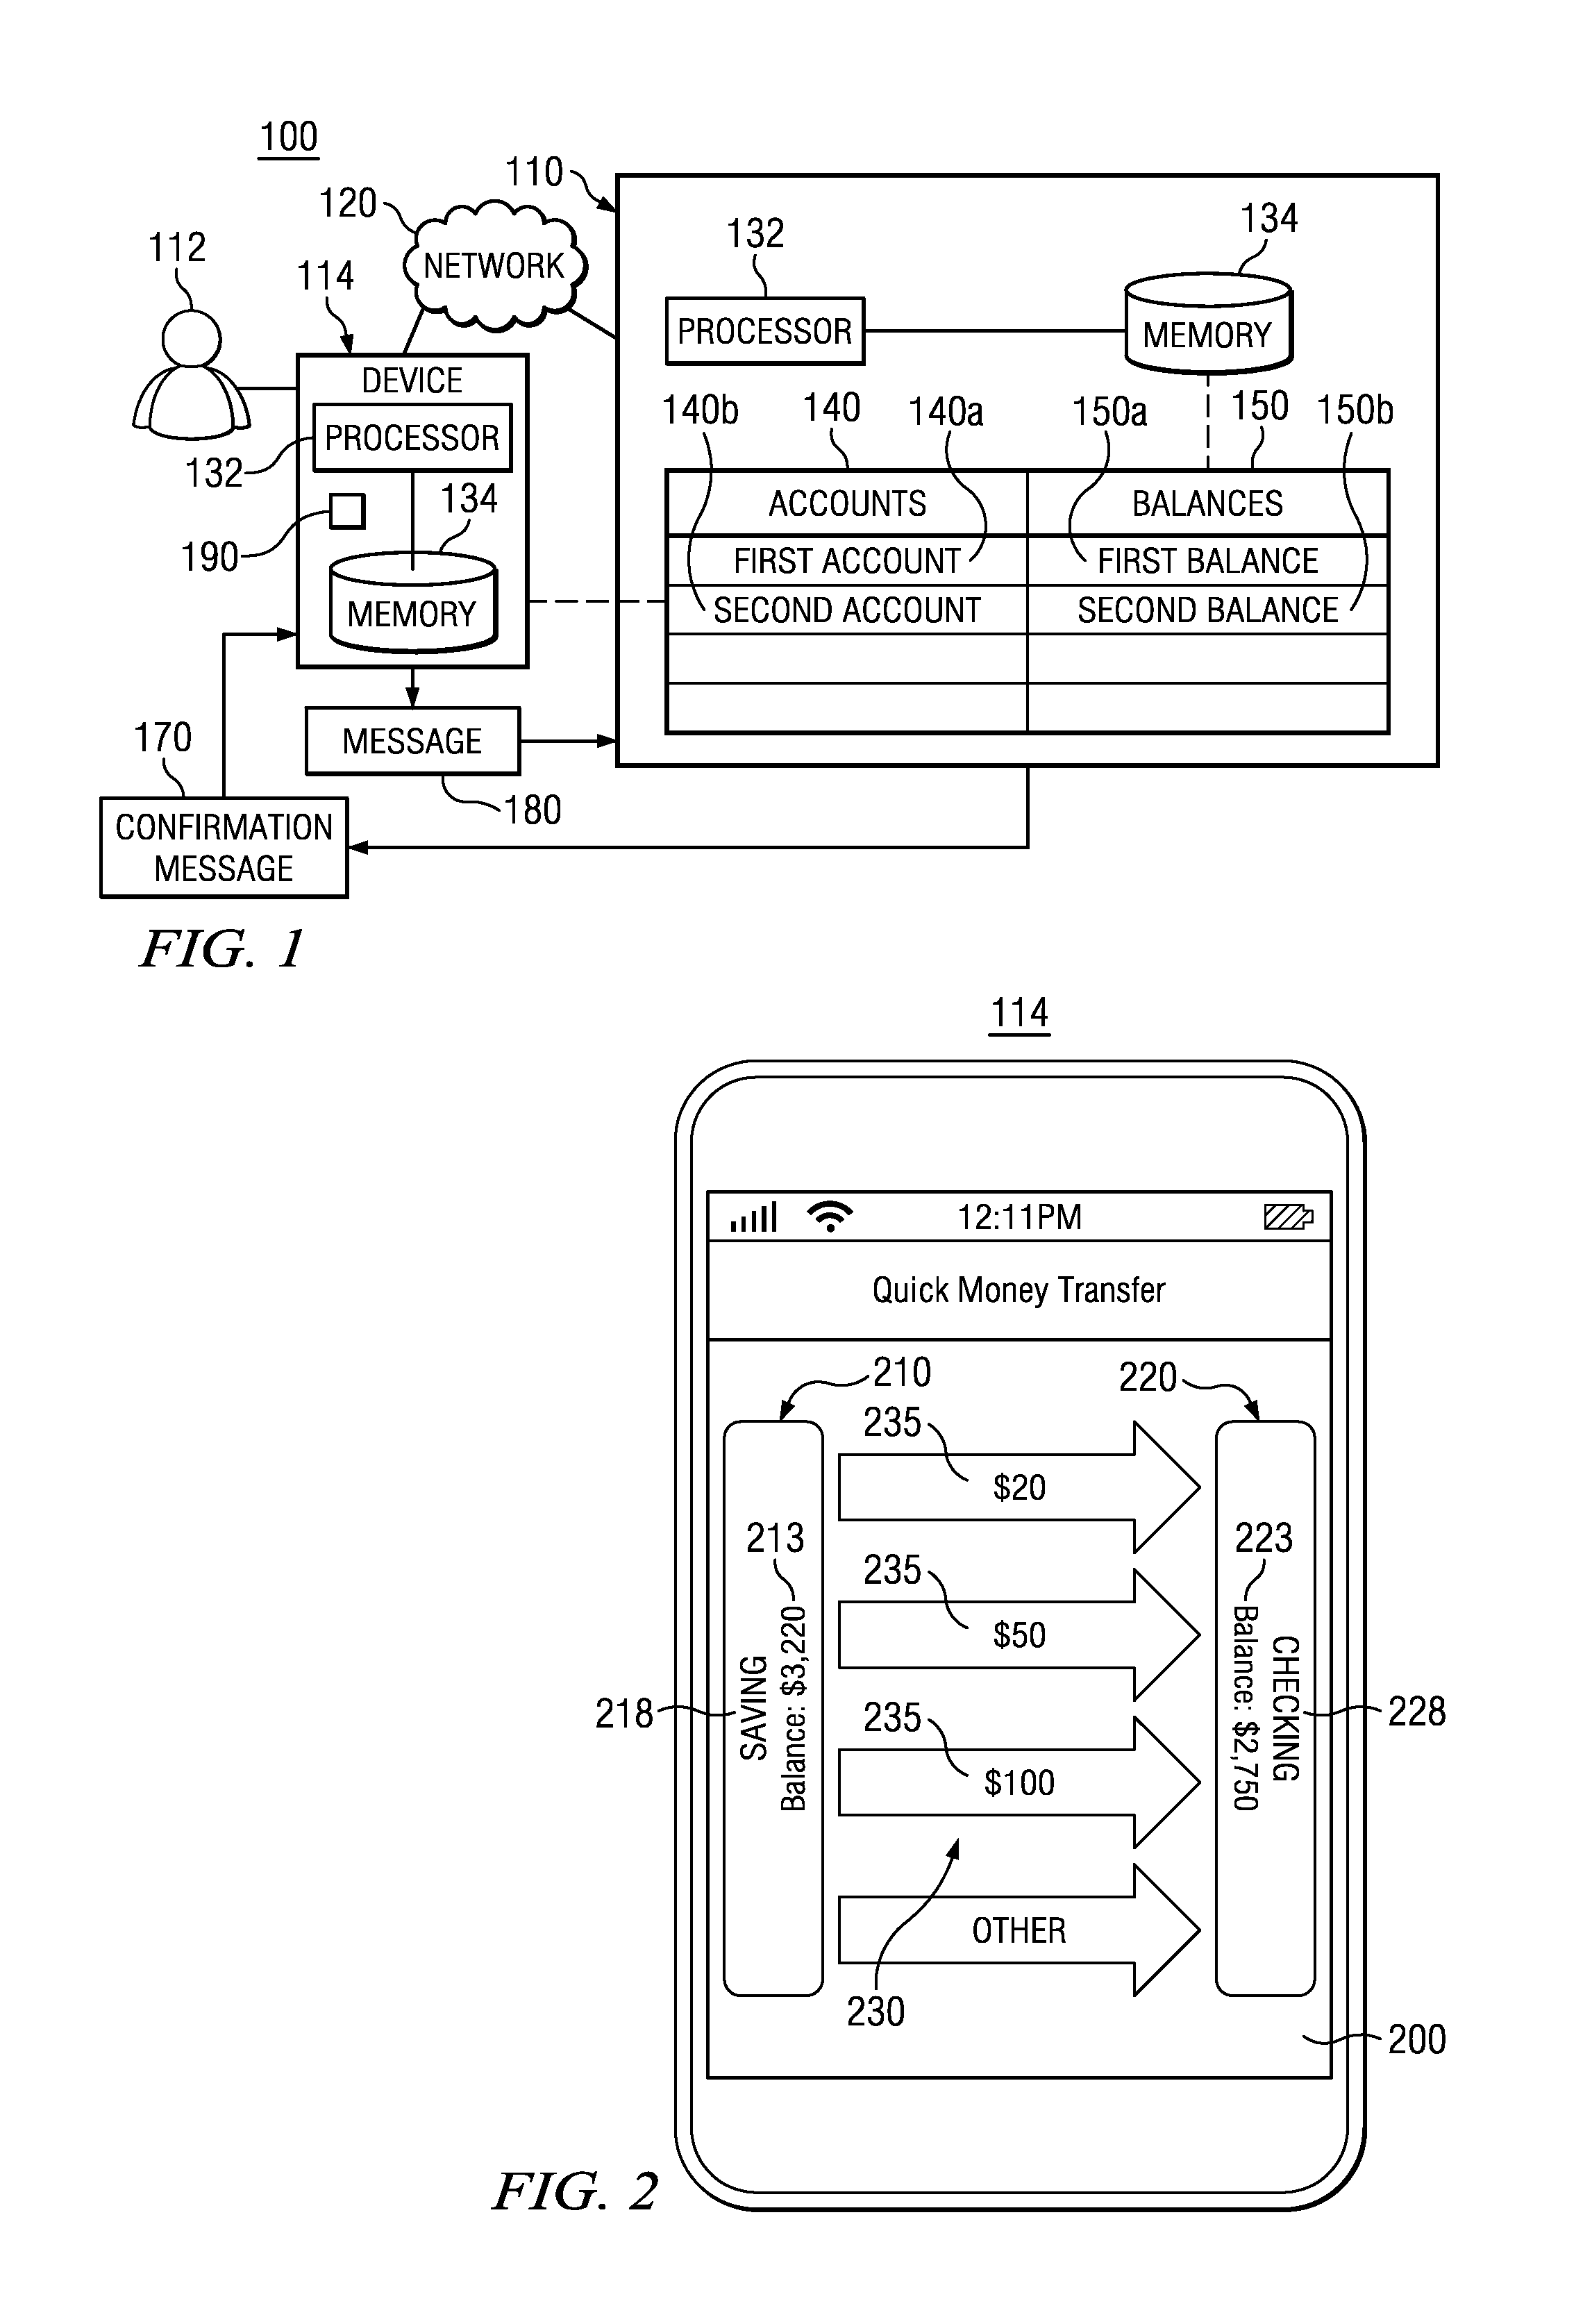 Apparatus and Method for the Electronic Transfer of Balances Between Accounts